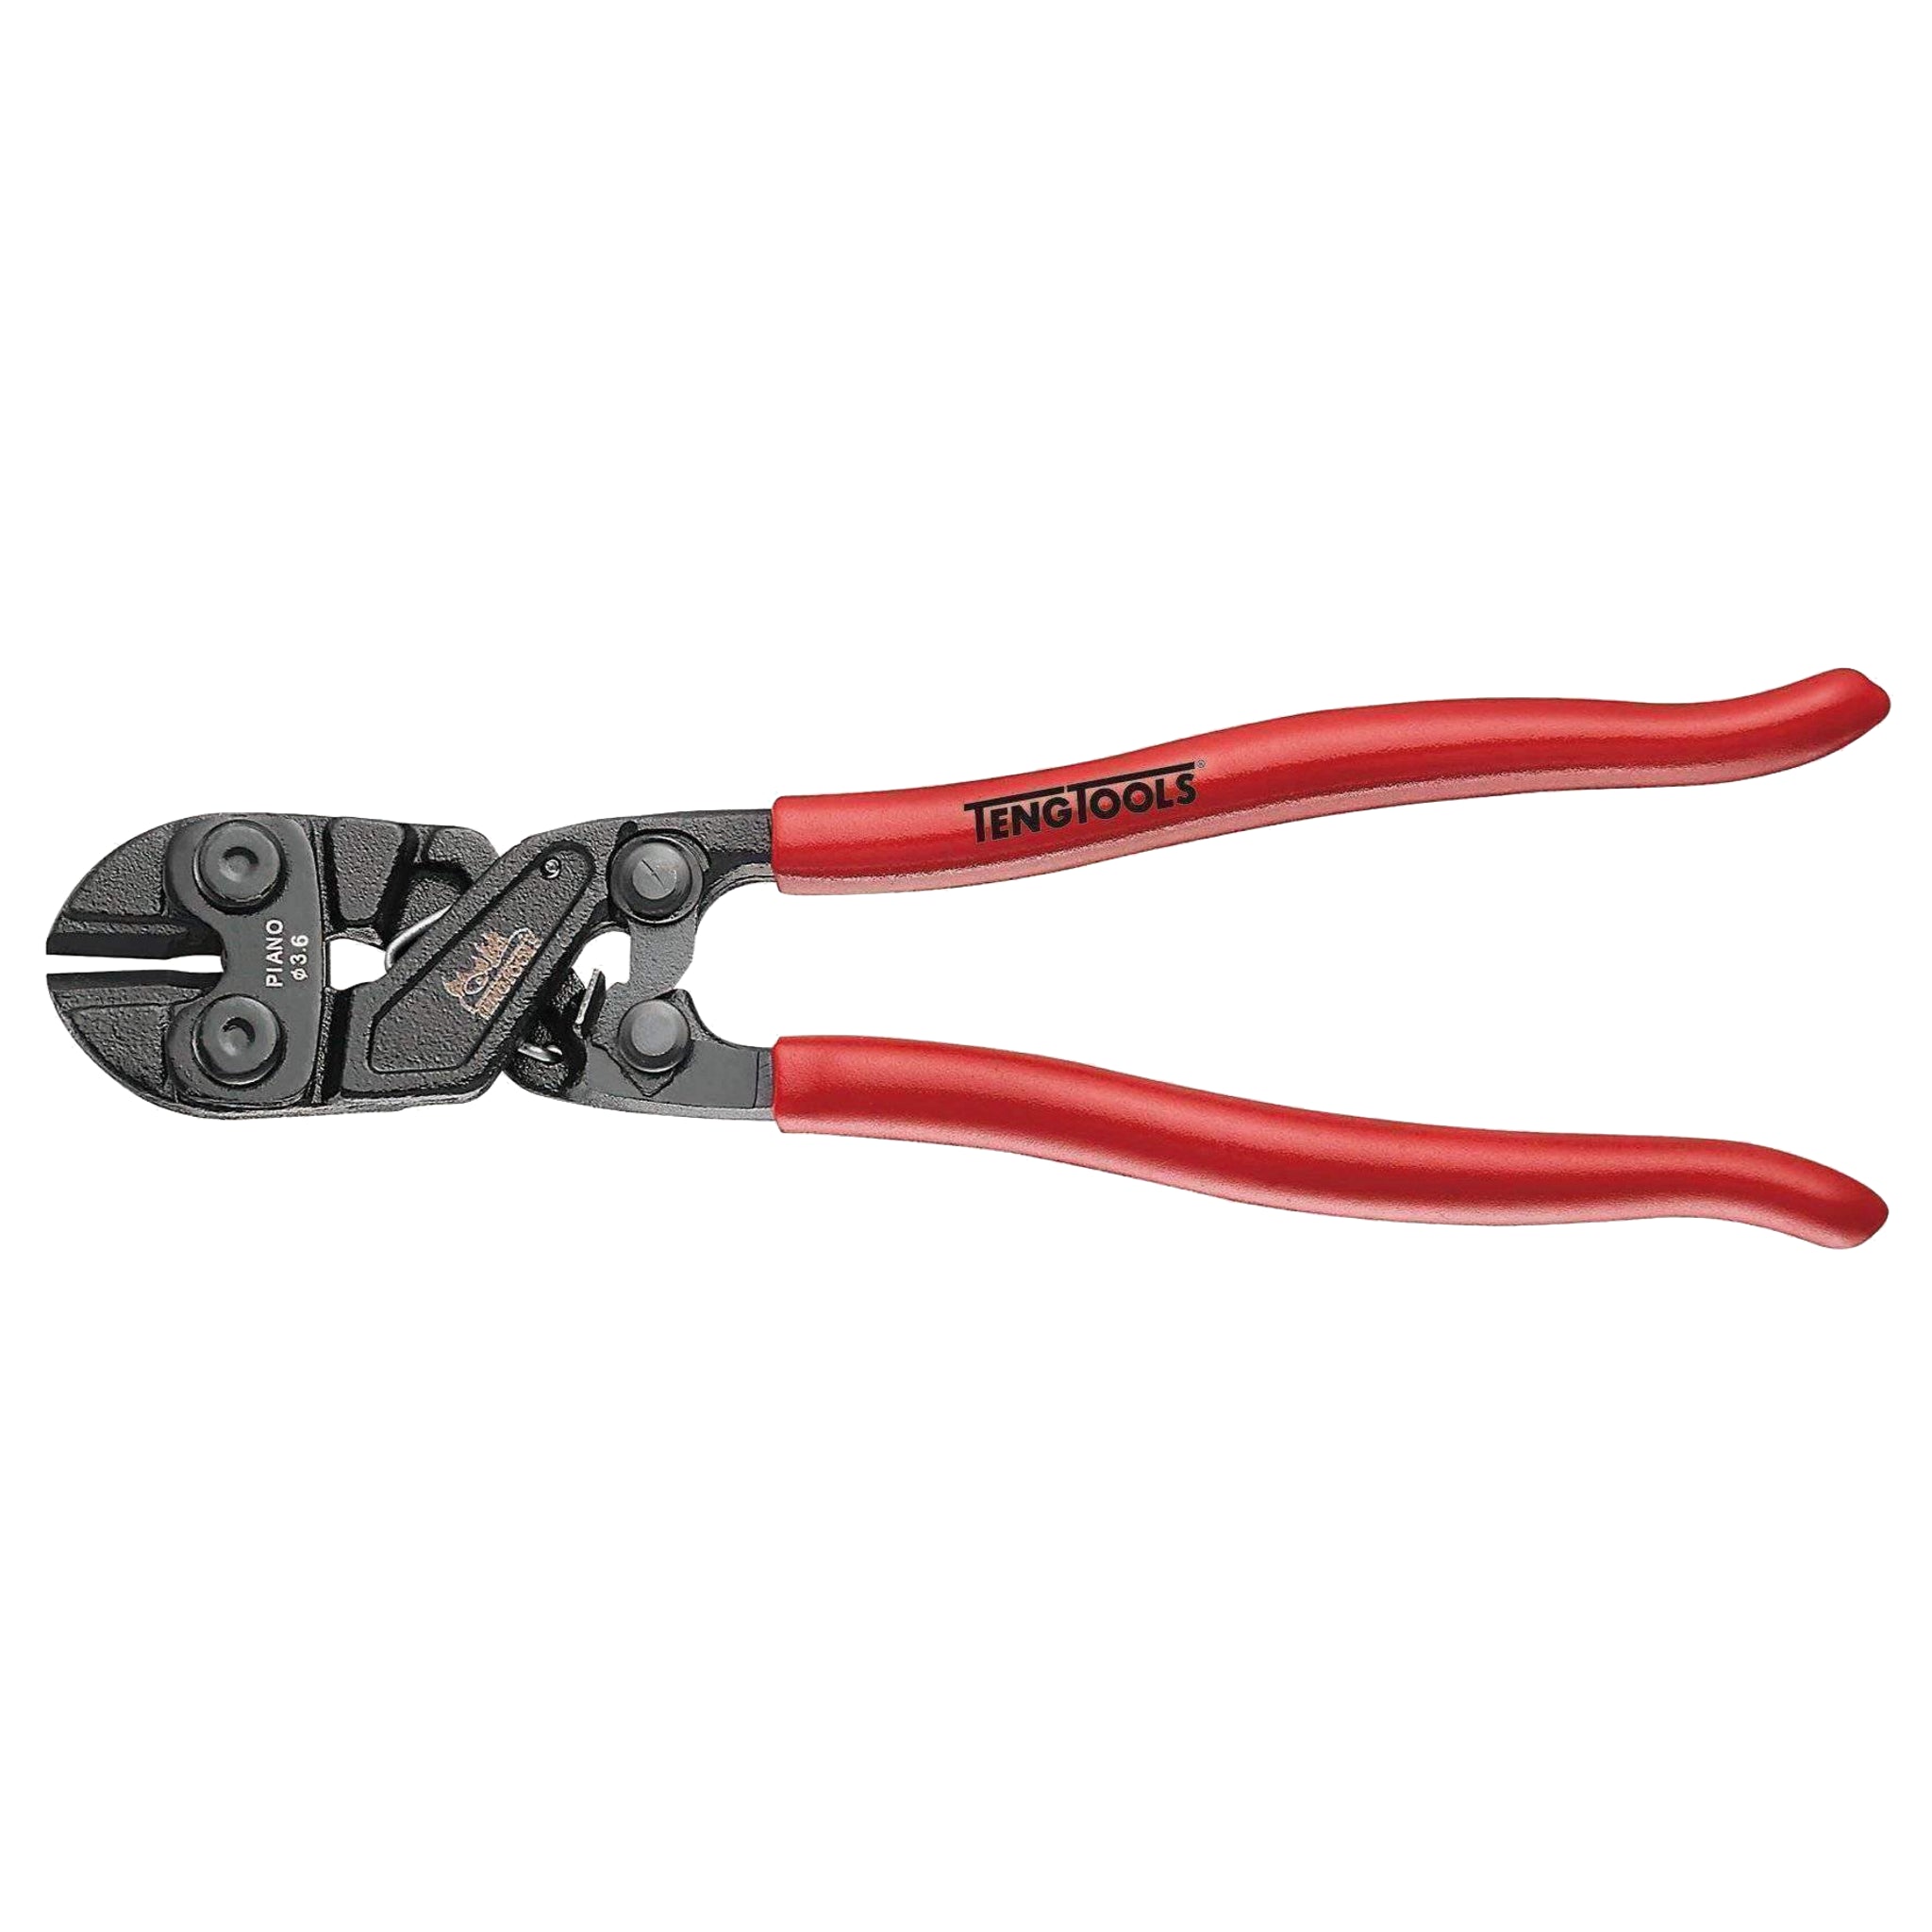 Teng Tools Bolt Cutters With Dipped Handle 8 To 36 Inches - 18 Inch